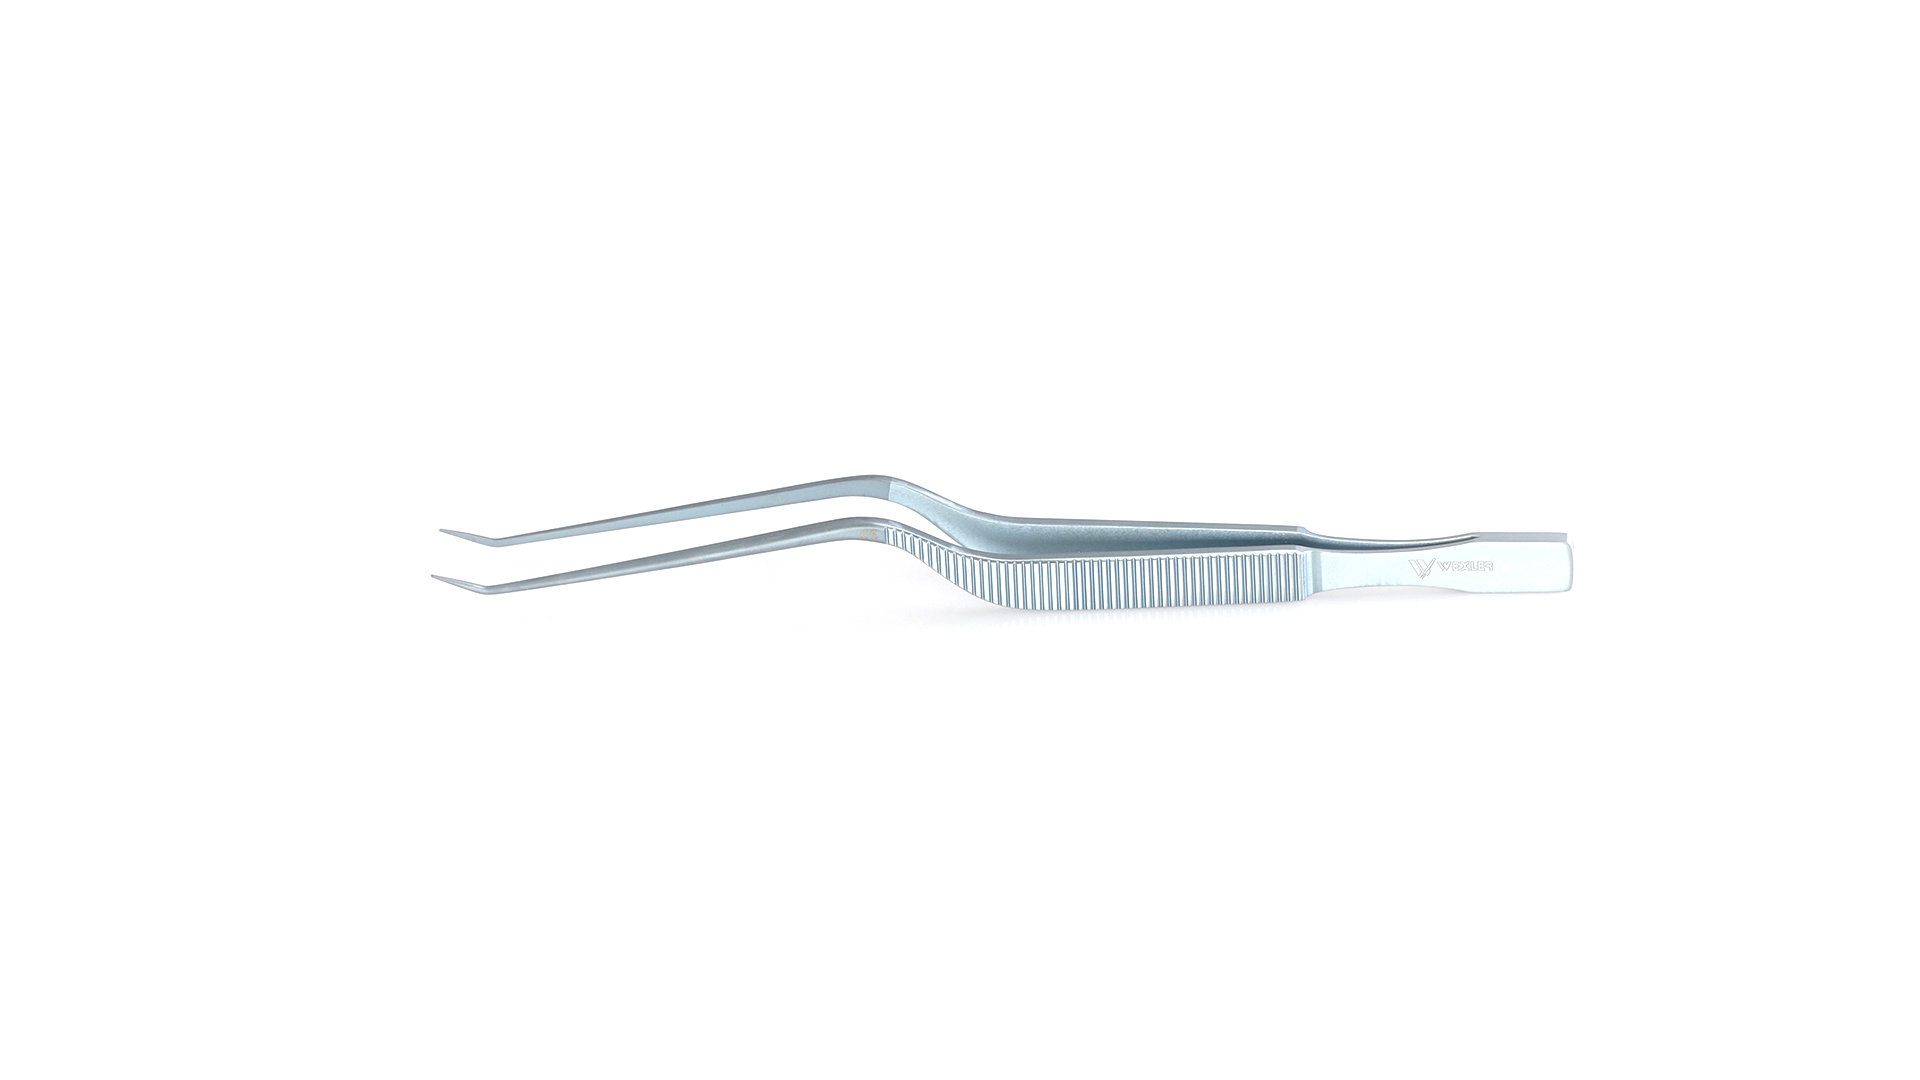 Micro Forceps - Angled 30° Up 0.5mm blunt tips